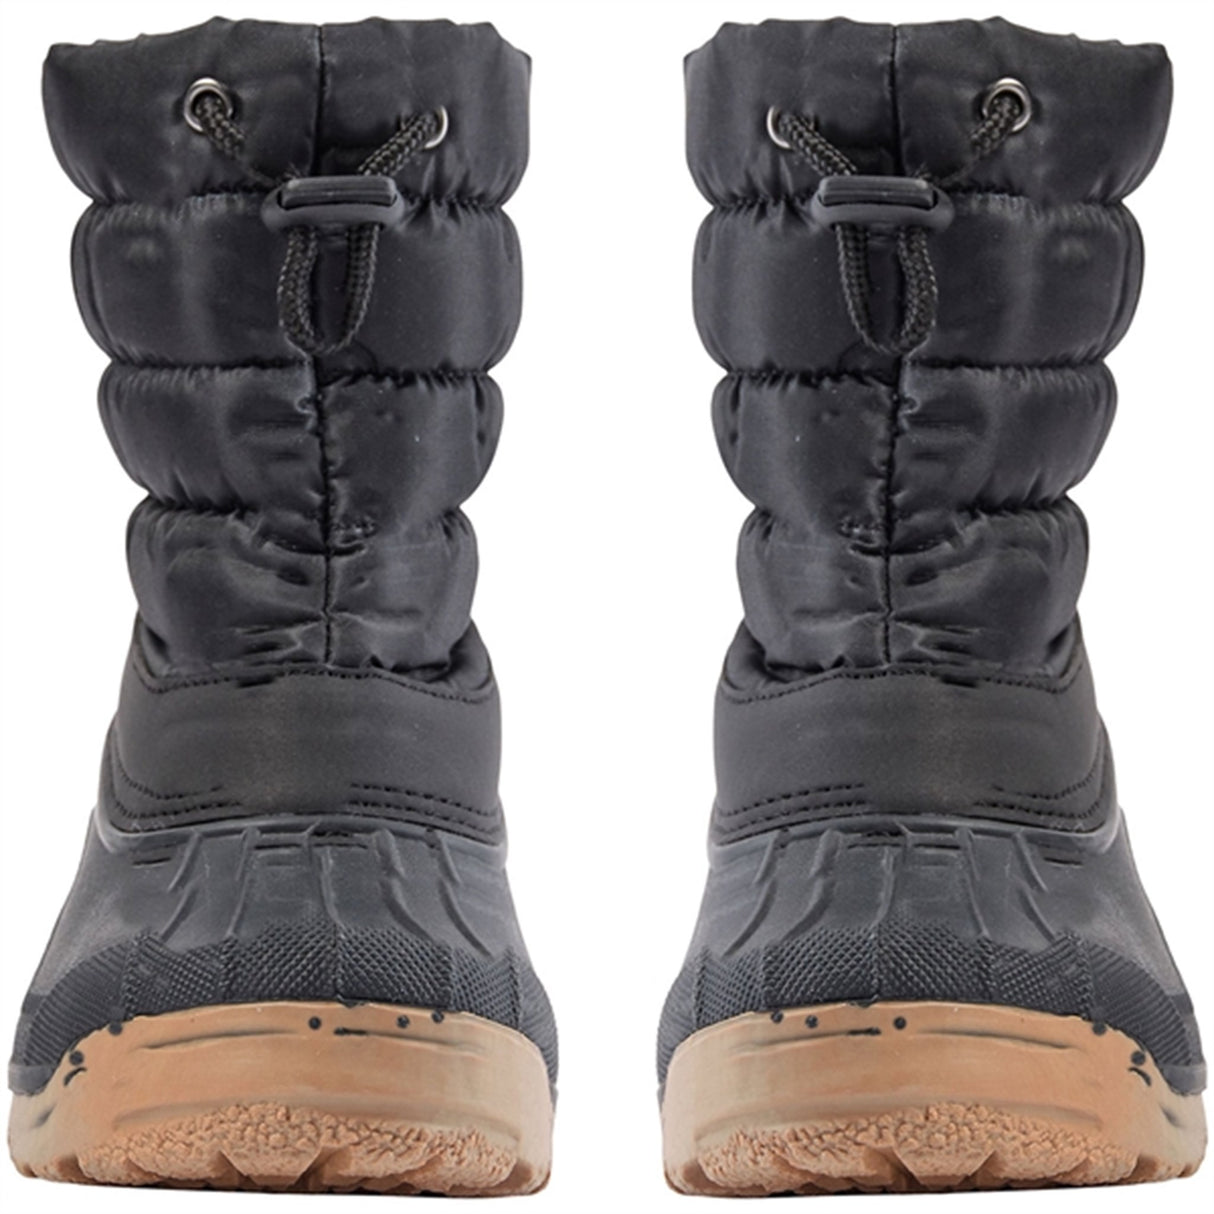 Sofie Schnoor Thermo Boots Black 7